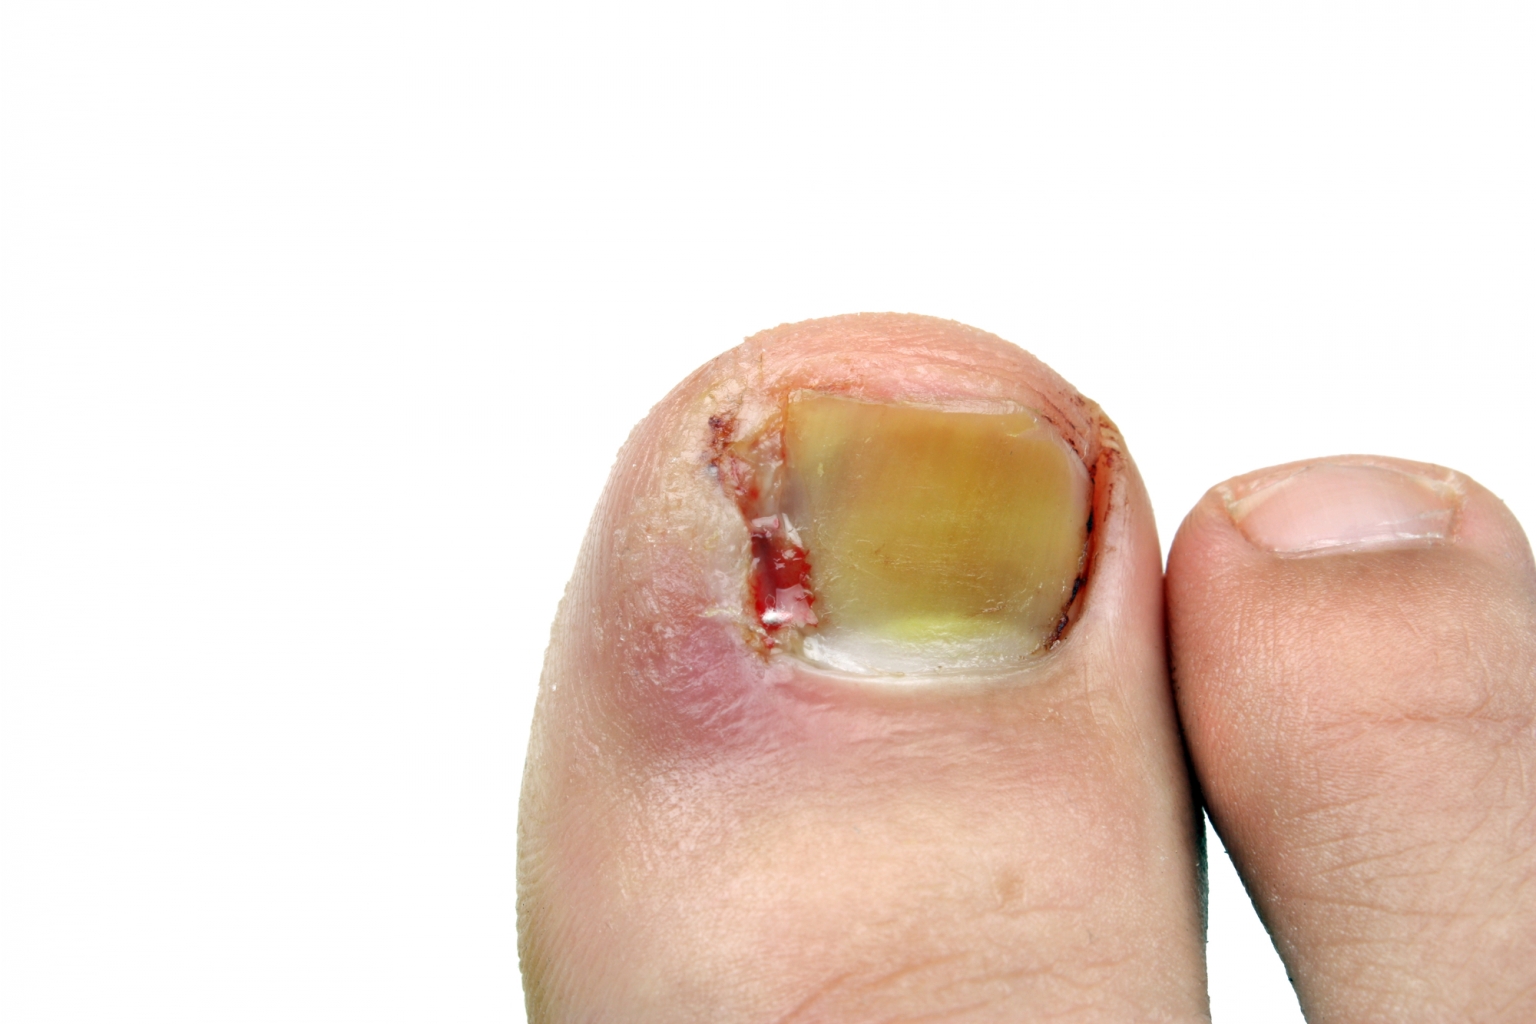 What can be done for an ingrown toenail? 